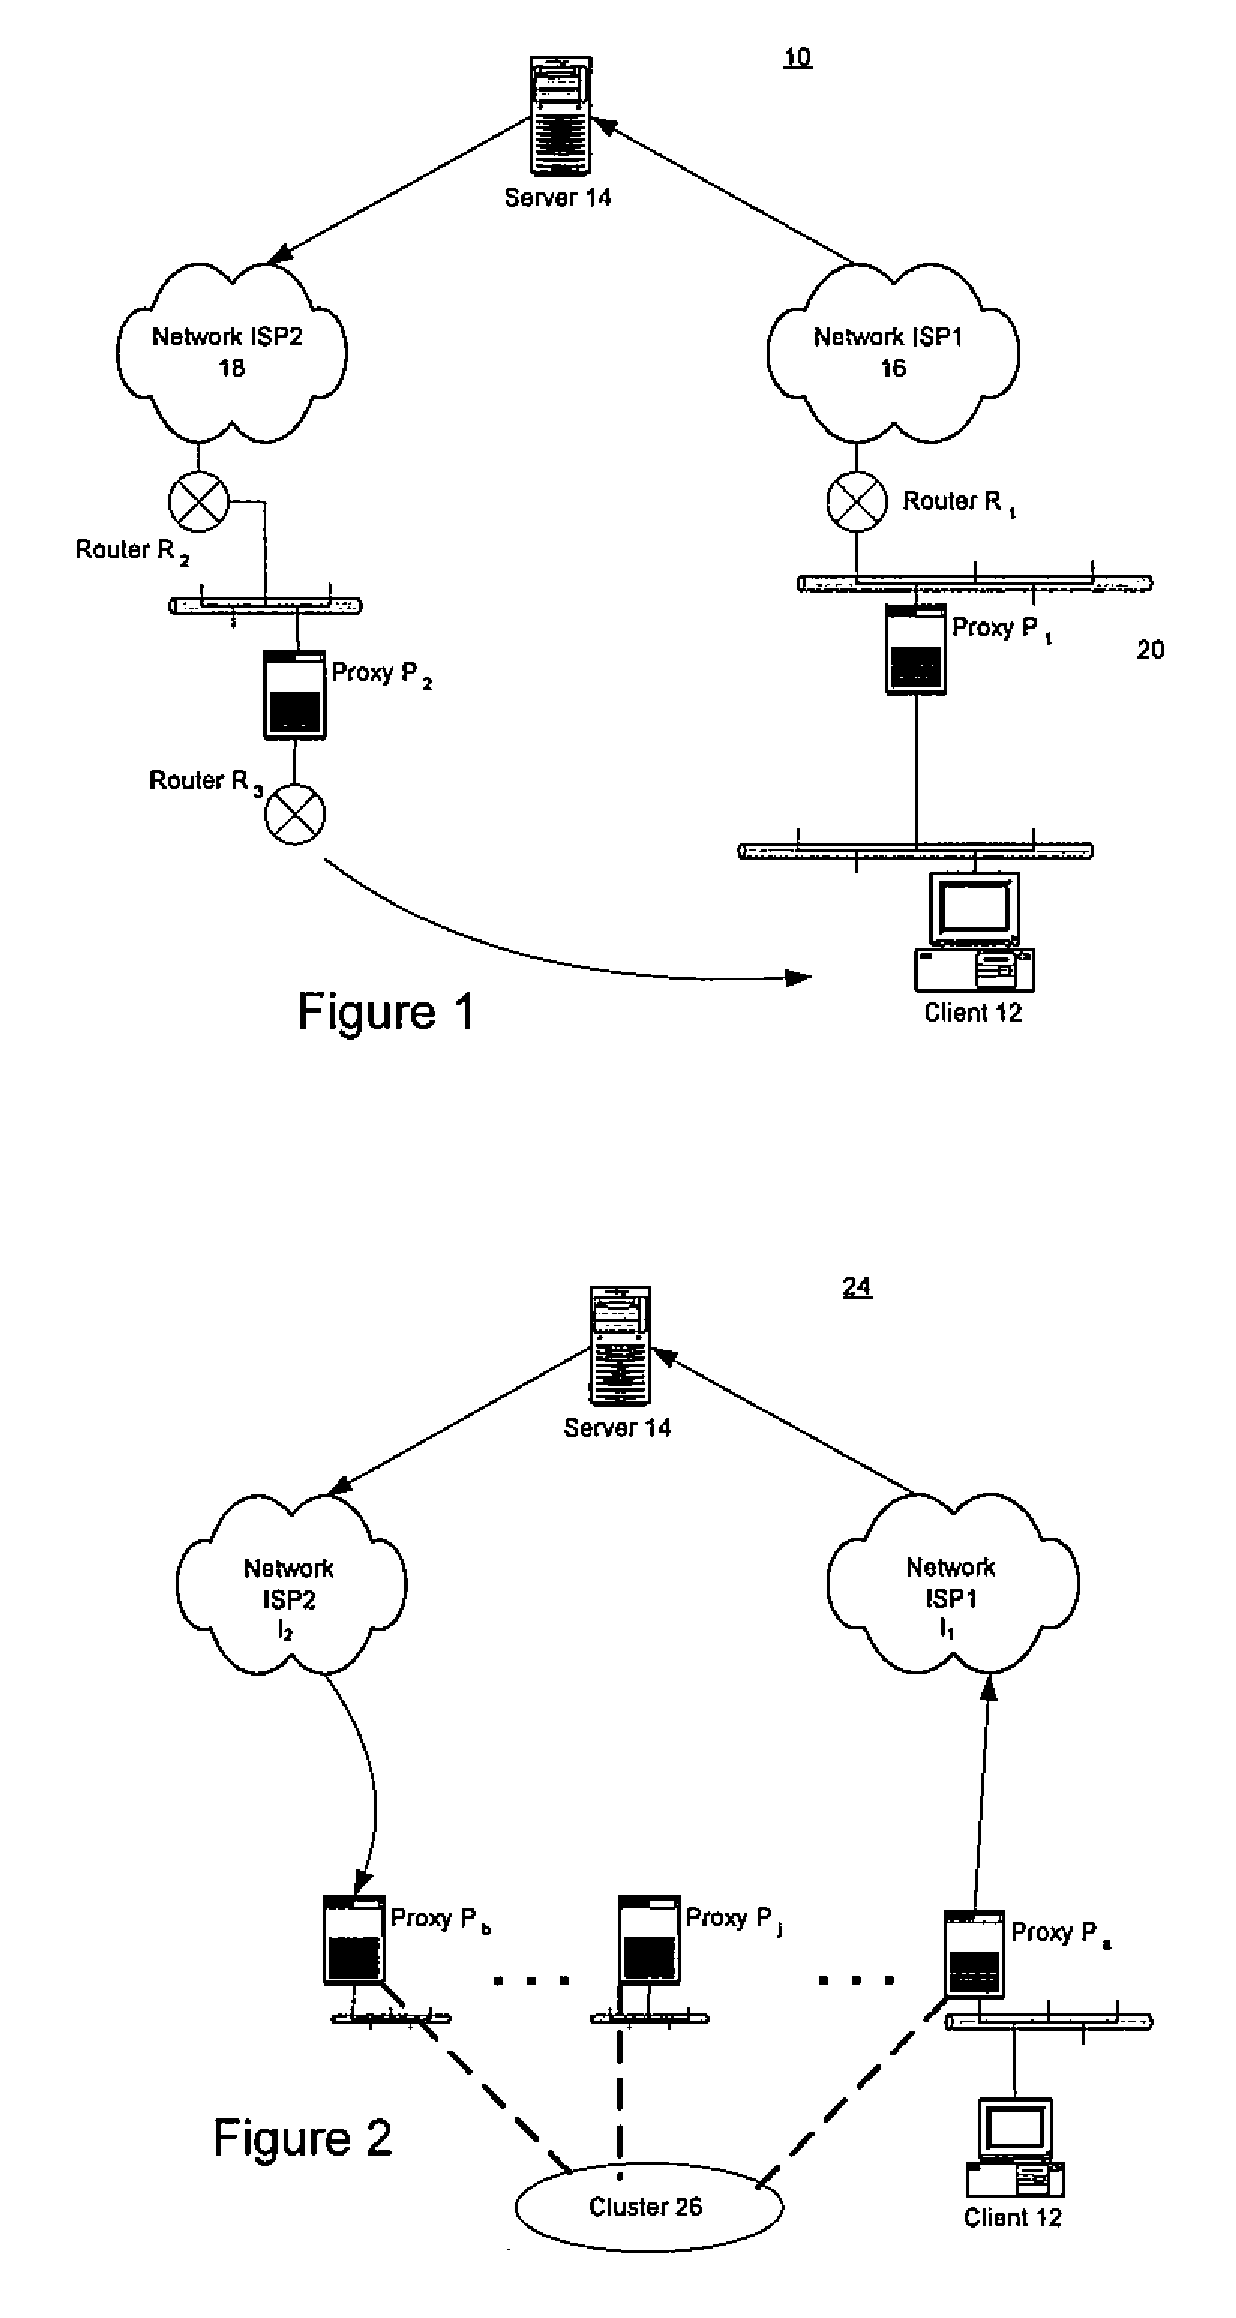 System and Method of Traffic Inspection and Stateful Connection Forwarding Among Geographically Dispersed Network Appliances Organized as Clusters